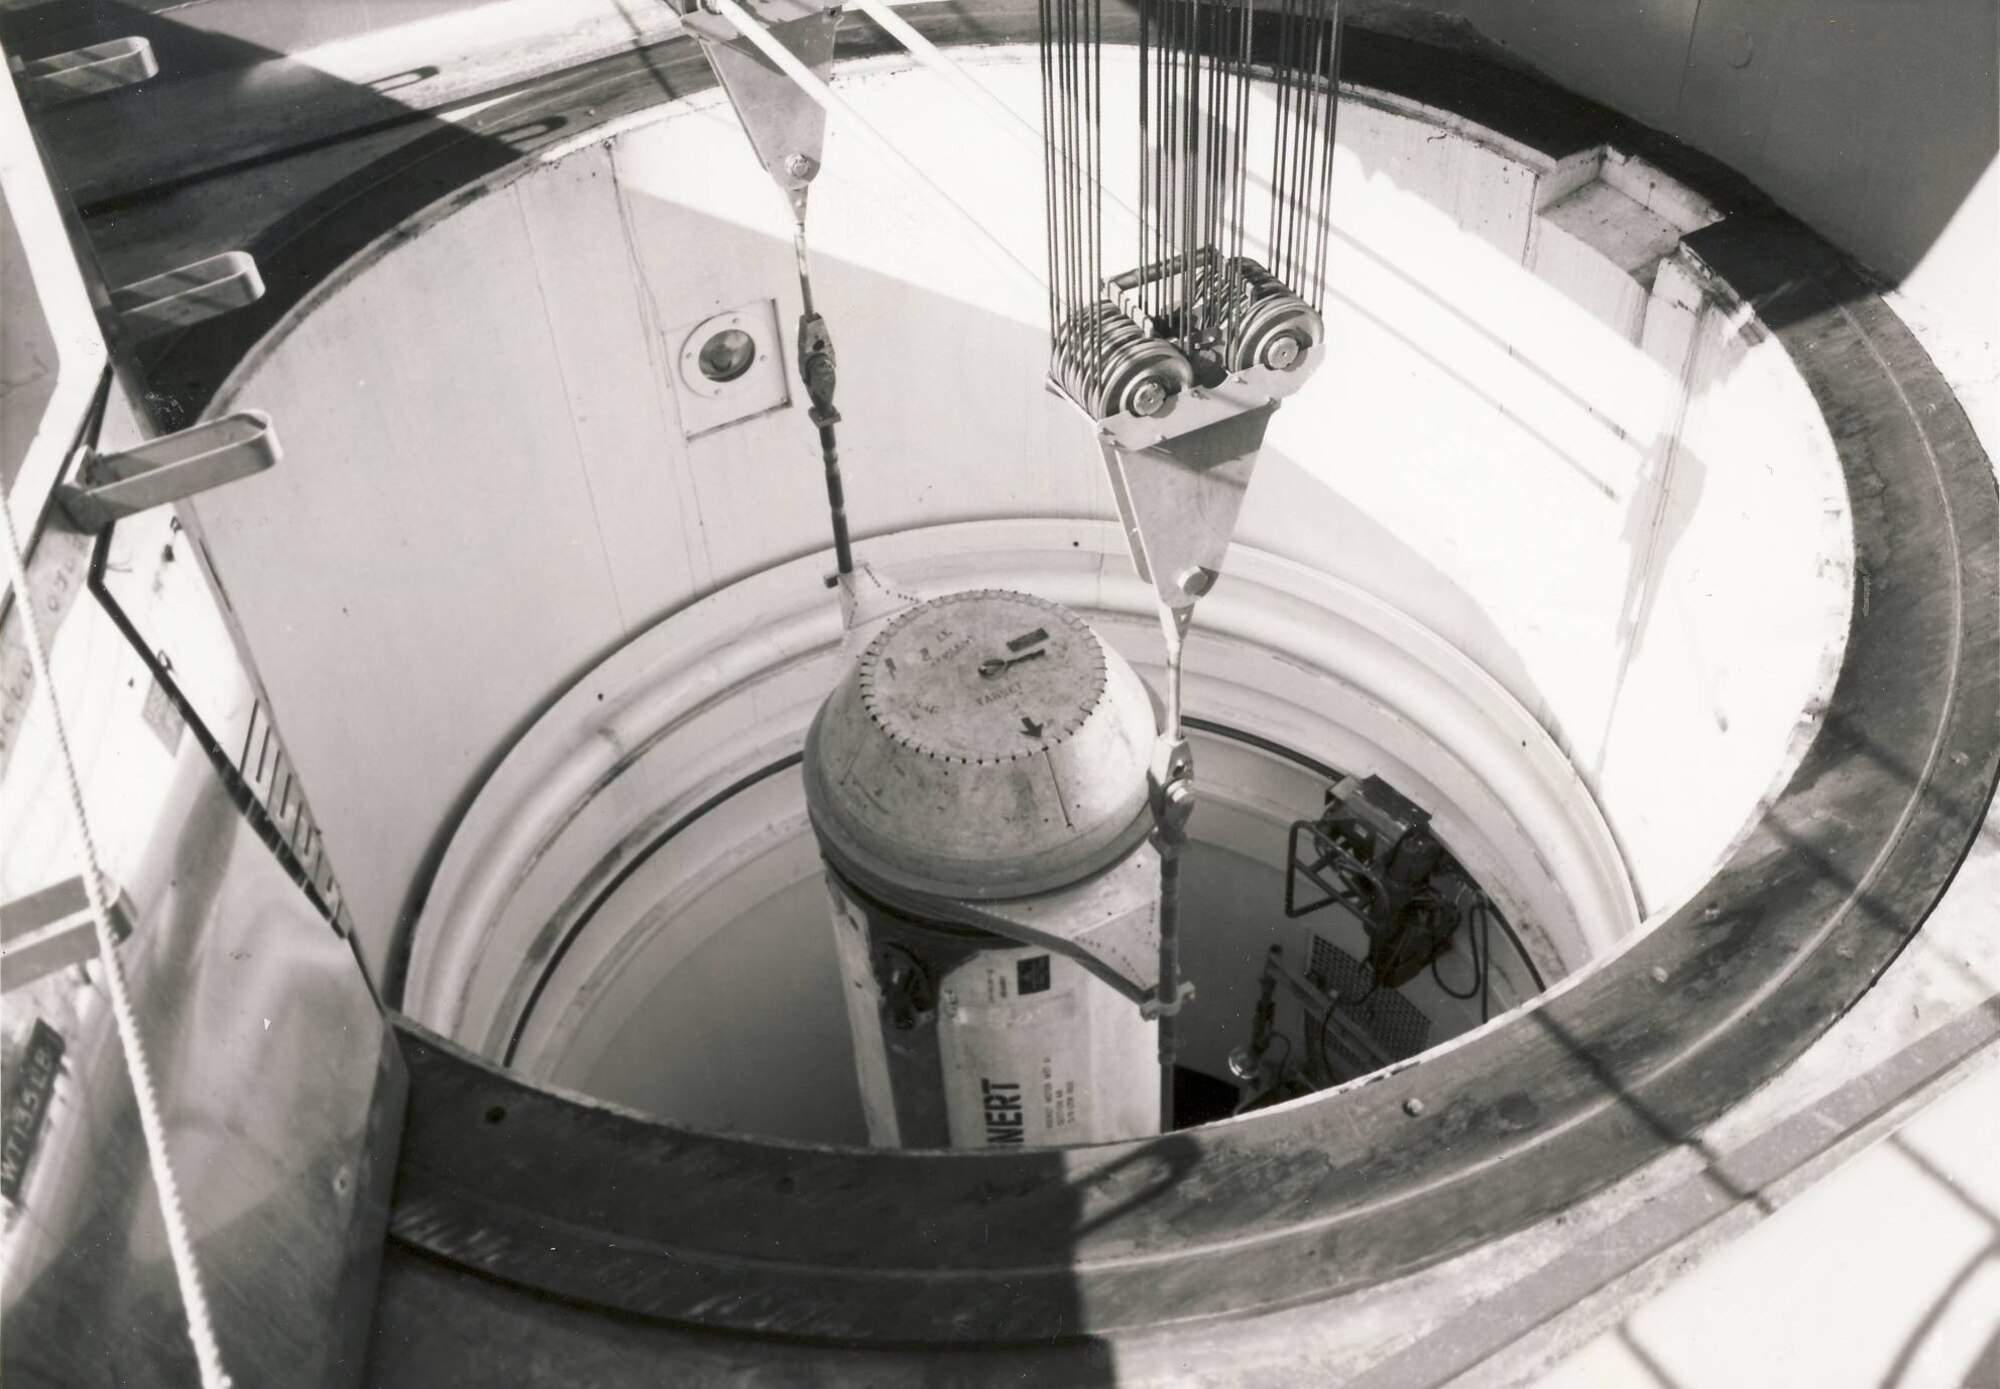 Originally constructed in 1965, the Hill Engineering and Test Facility allowed the Ogden Air Logistics Center (ALC) to complete system-level testing and integration during the 1980s. This photograph depicts an inert Minuteman ICBM being lowered into its silo at the facility during construction.